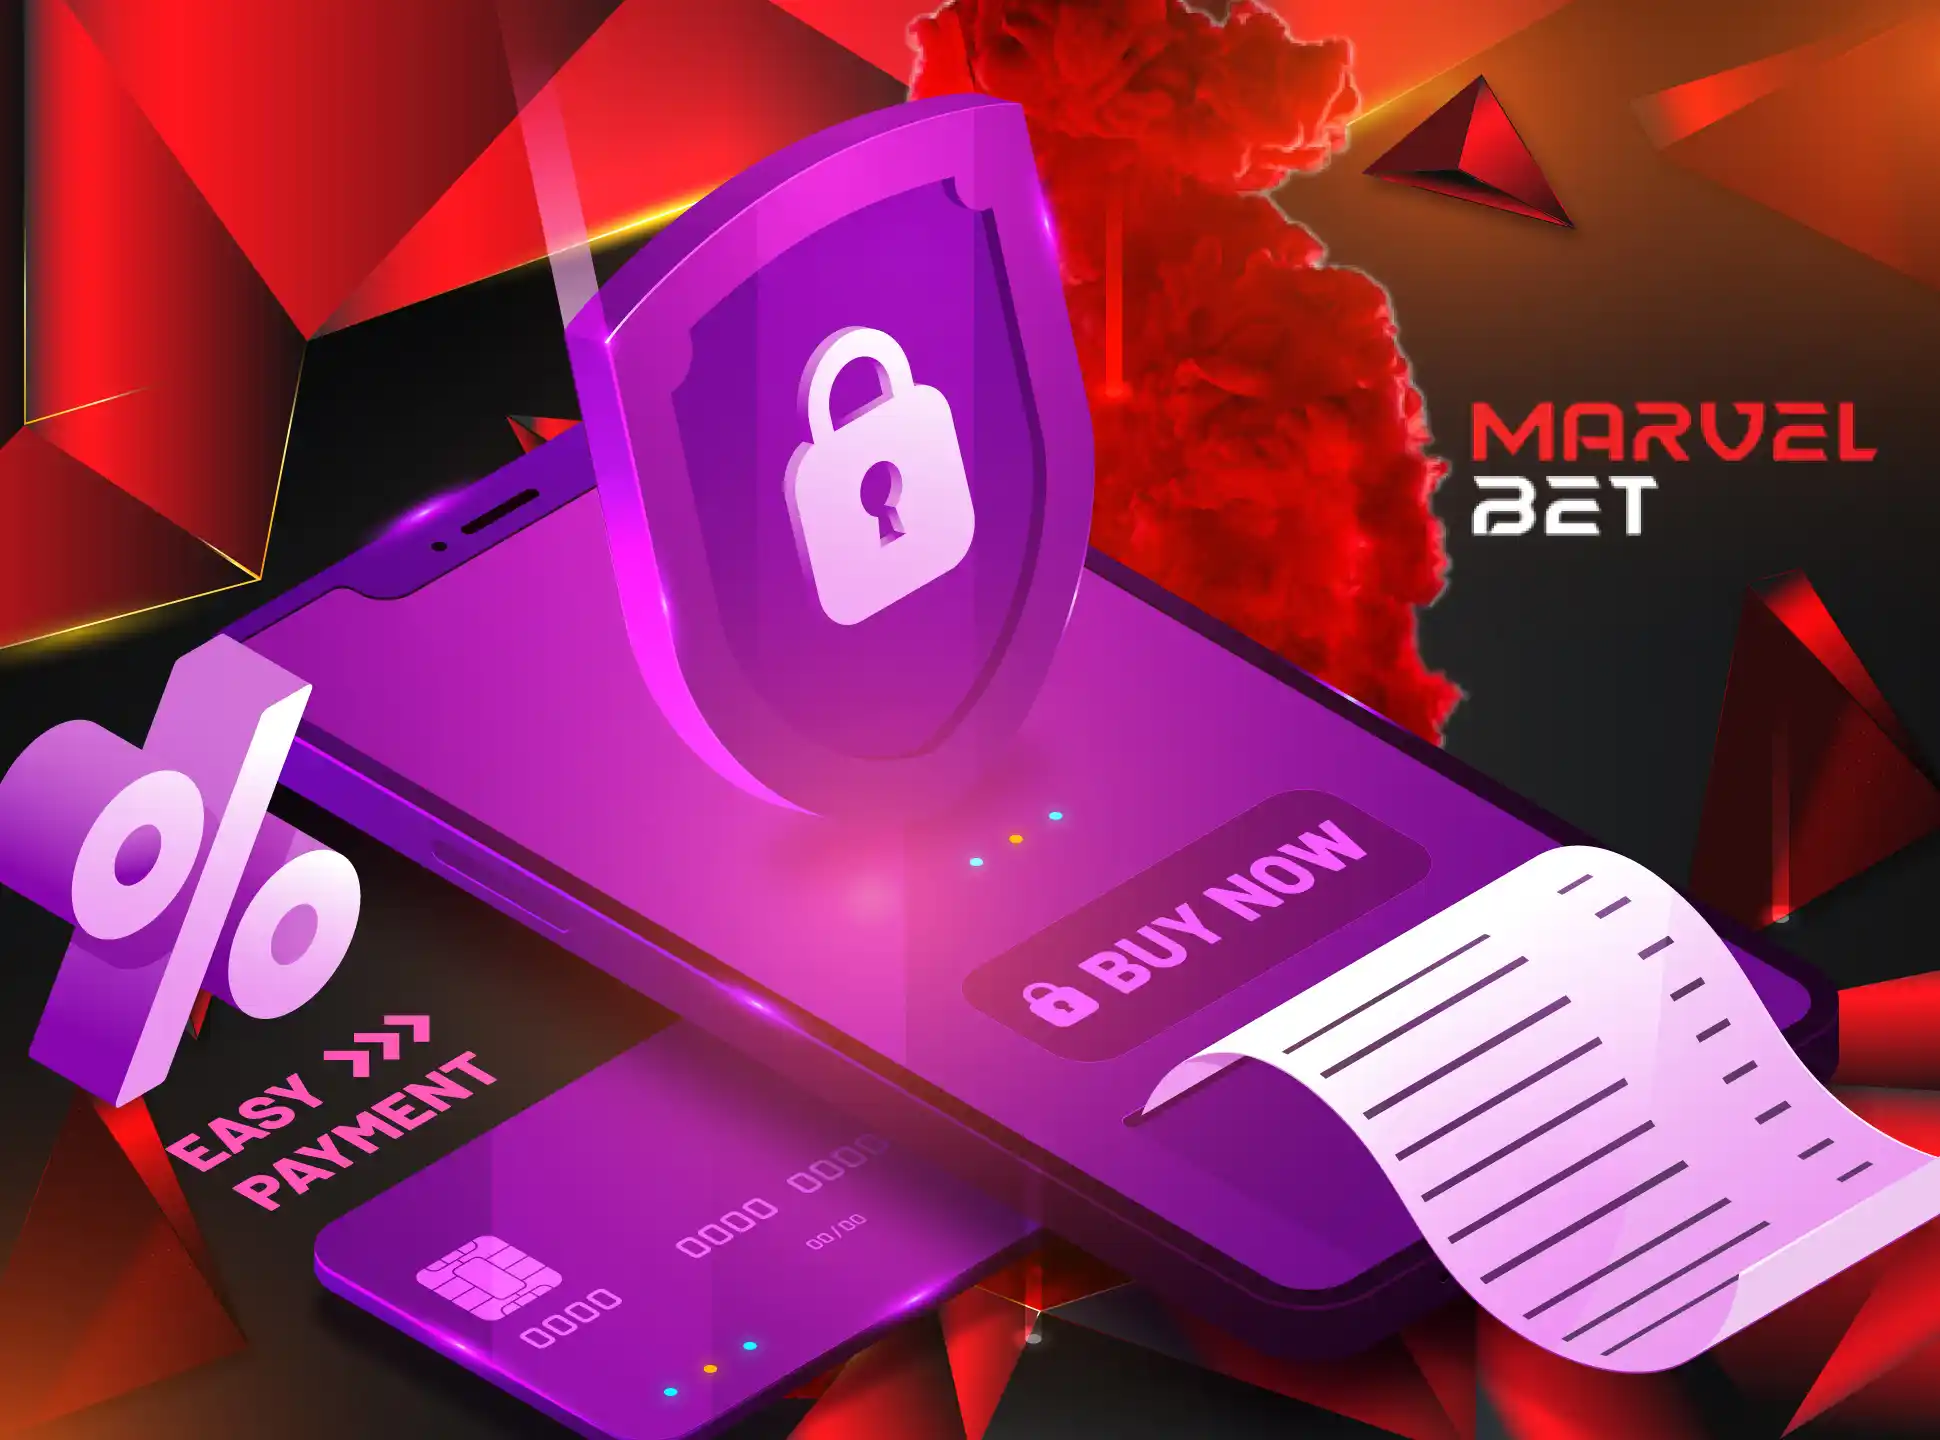 Deposit and withdraw money instantly at MarvelBet.